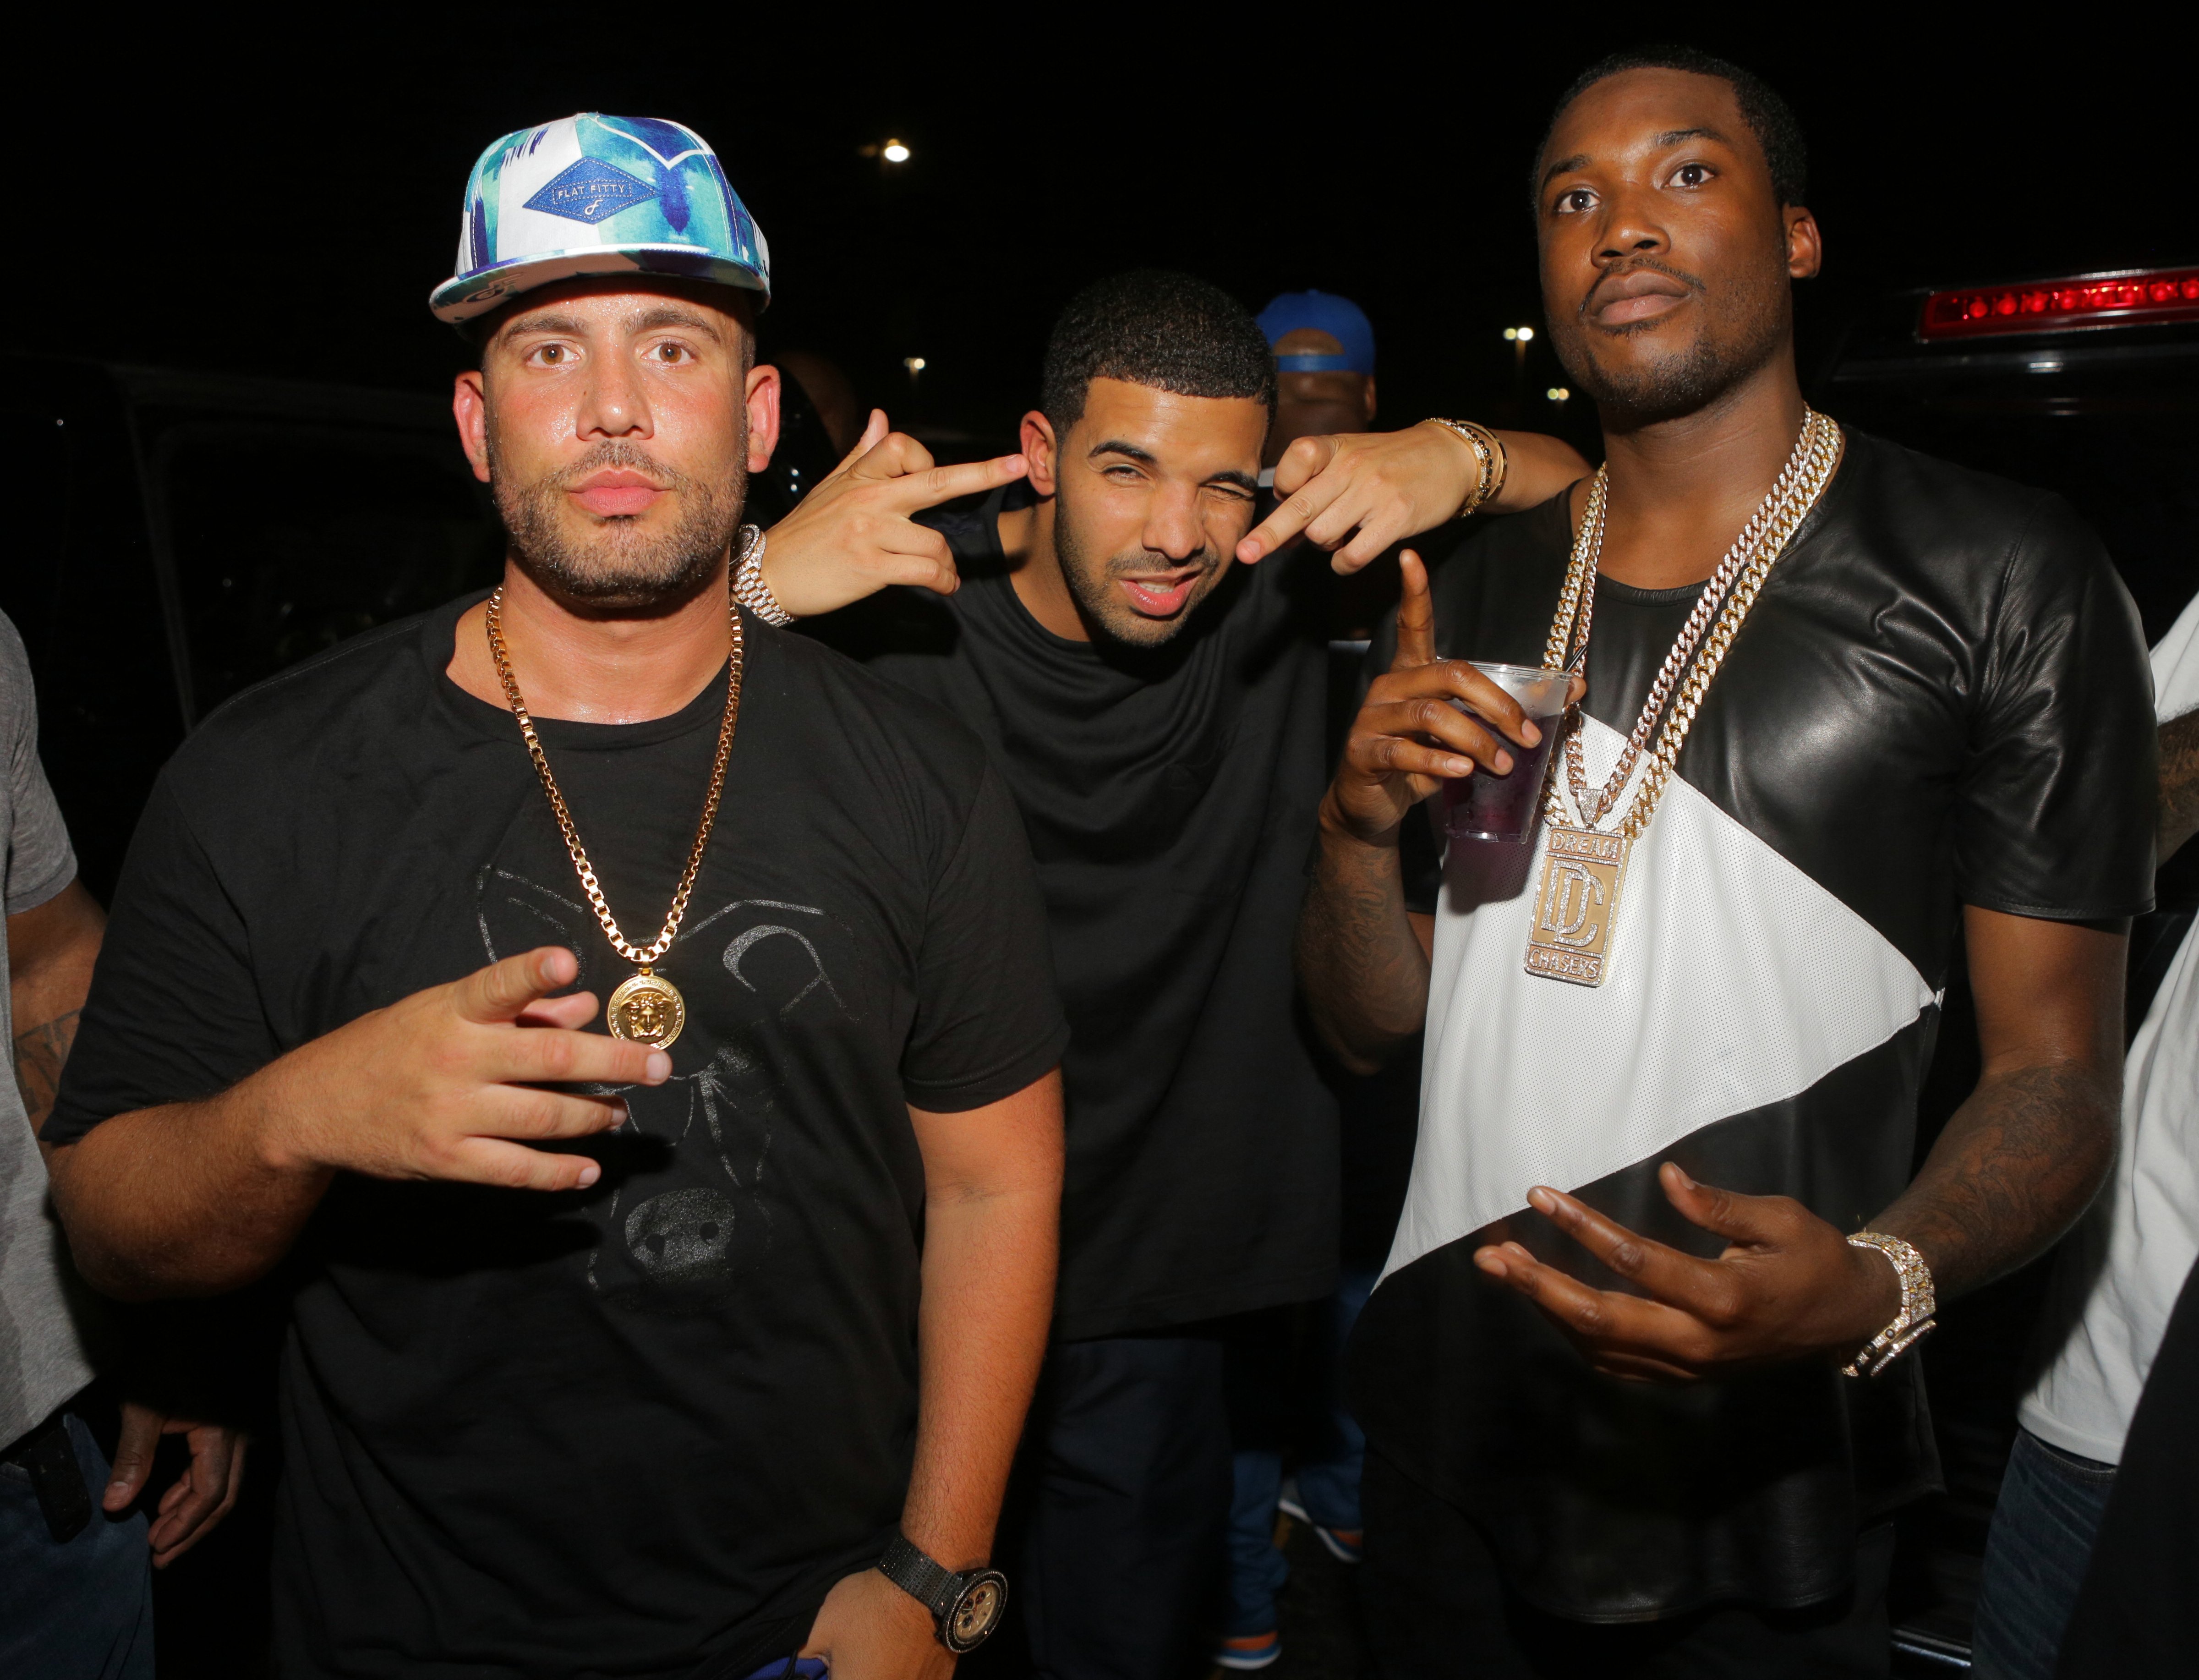 DJ Drama Is “A Goofy Over These H*es,” Meek Mill Says